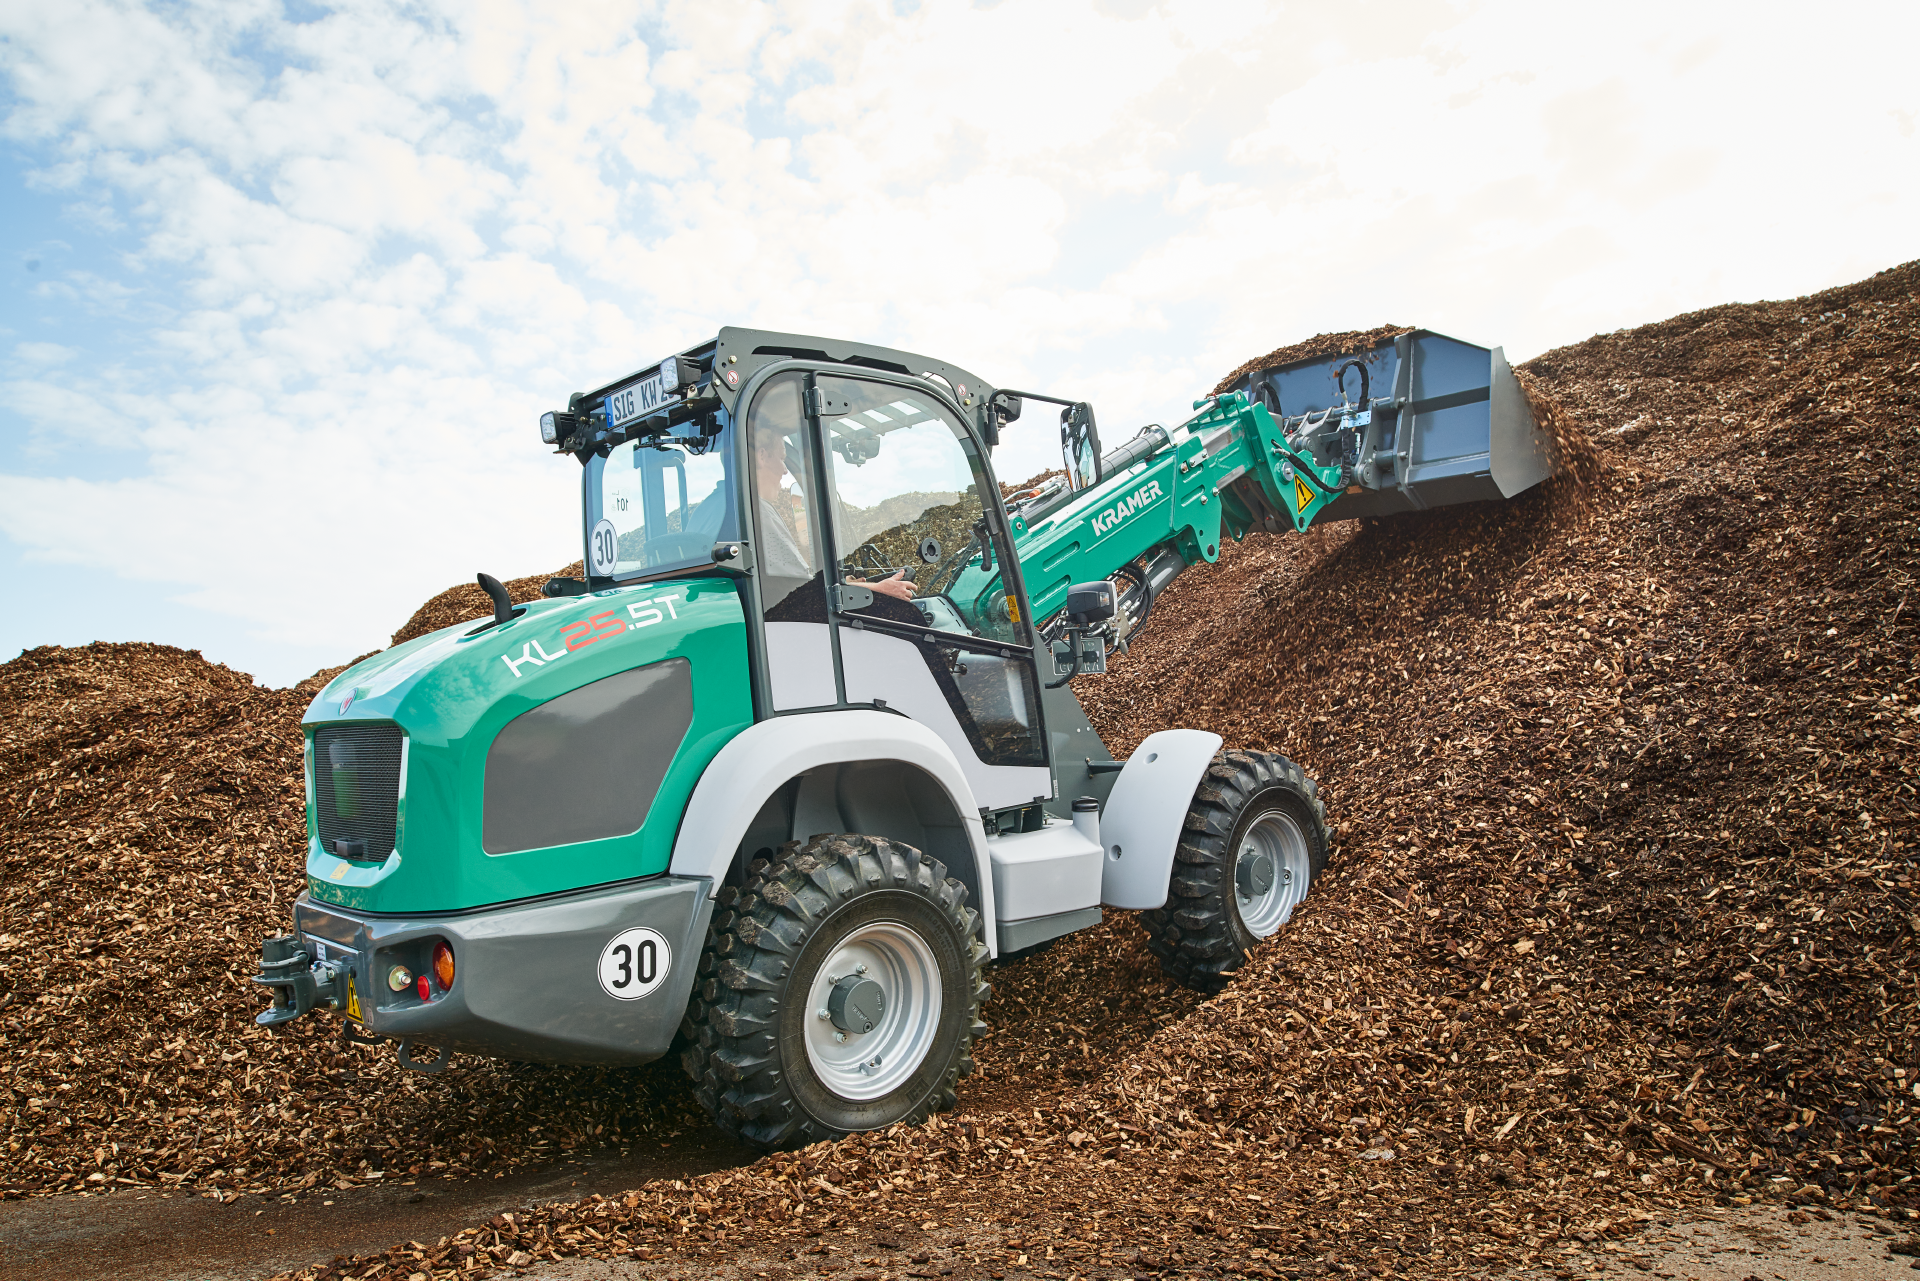 The Kramer telescopic wheel loader KL25.5T while working with wood chips.